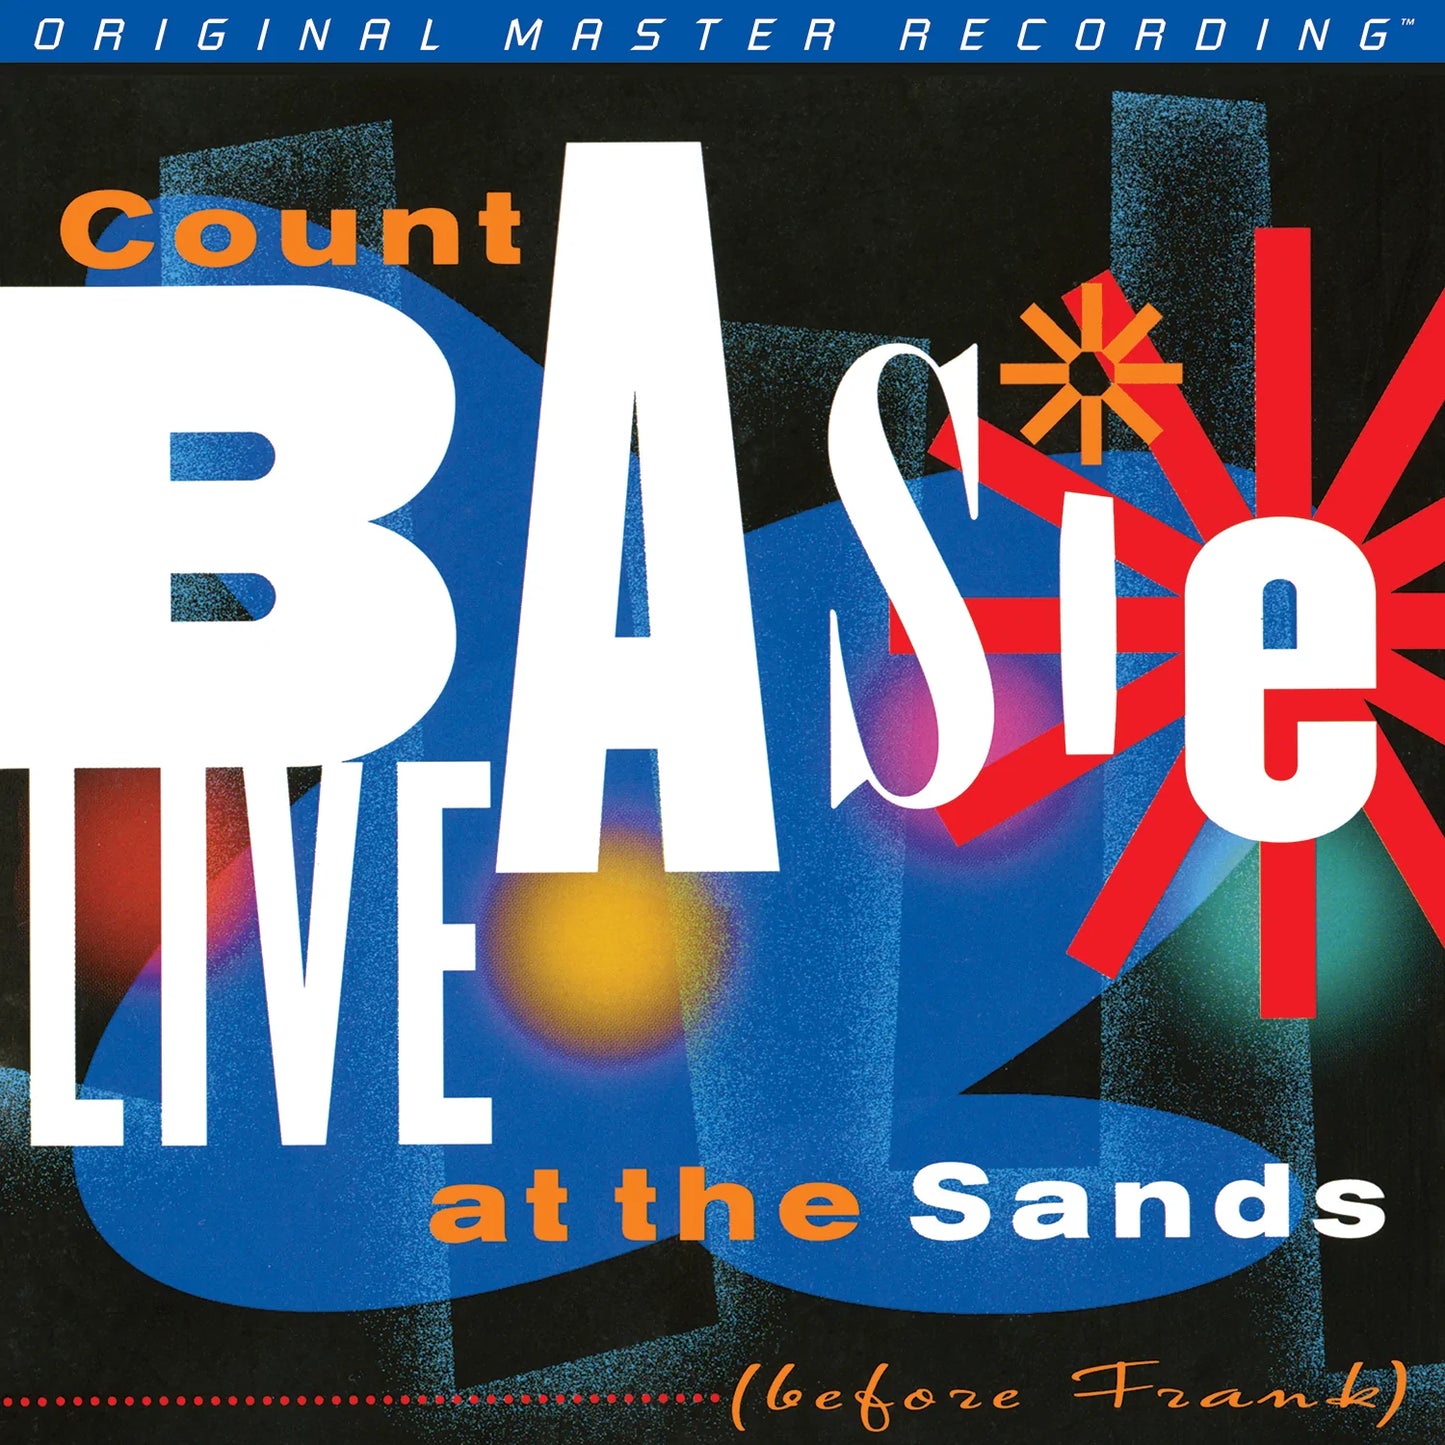 Count Basie - Live At The Sands (Before Frank) - MFSL SACD